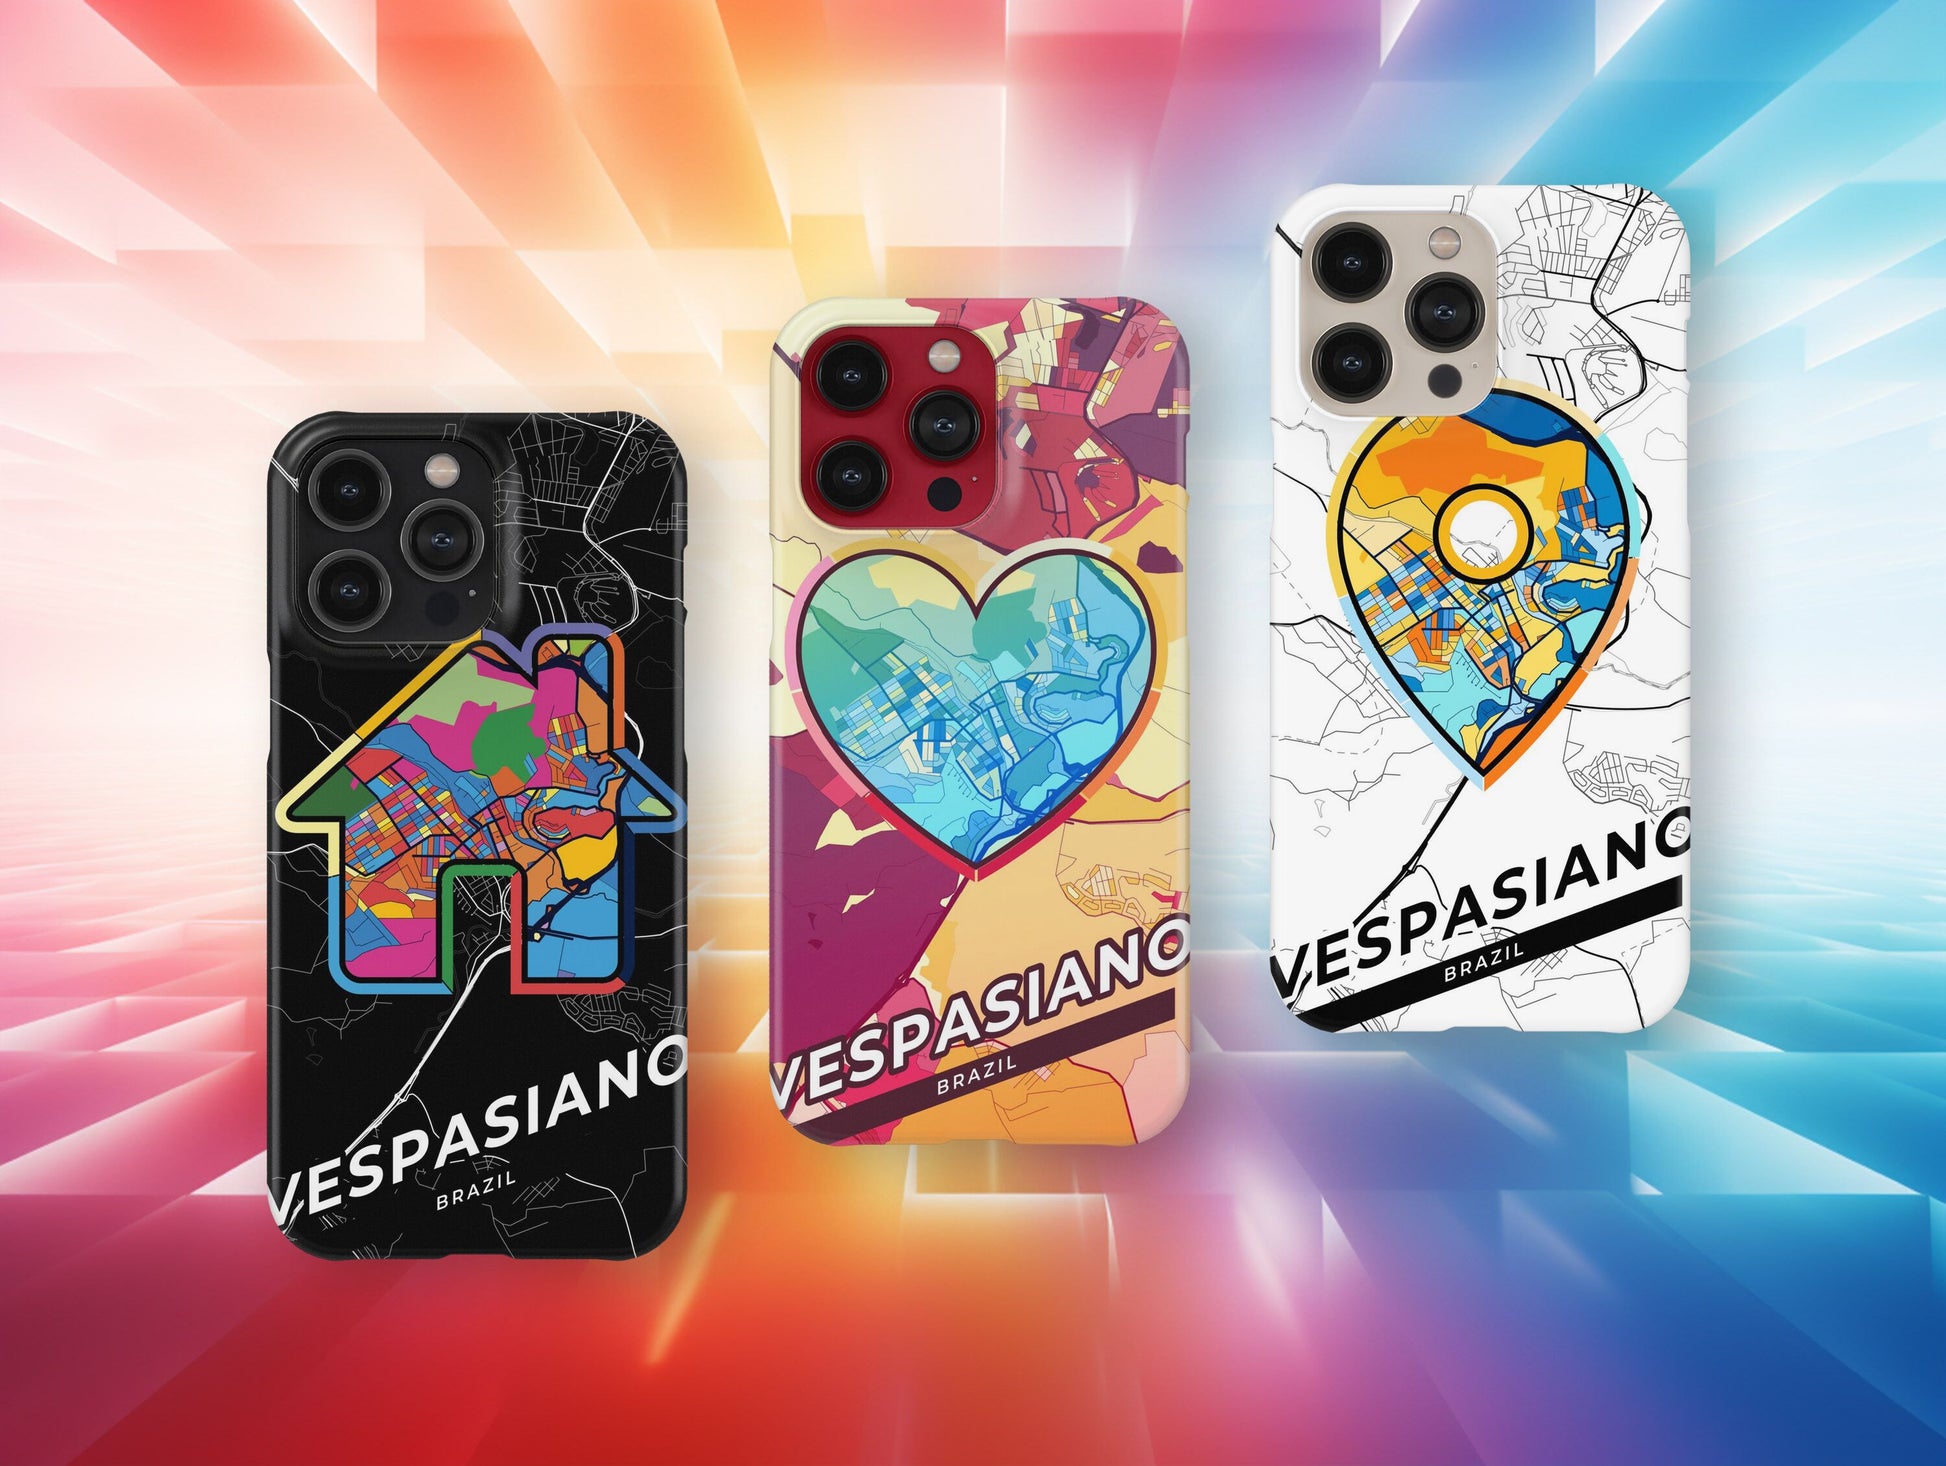 Vespasiano Brazil slim phone case with colorful icon. Birthday, wedding or housewarming gift. Couple match cases.